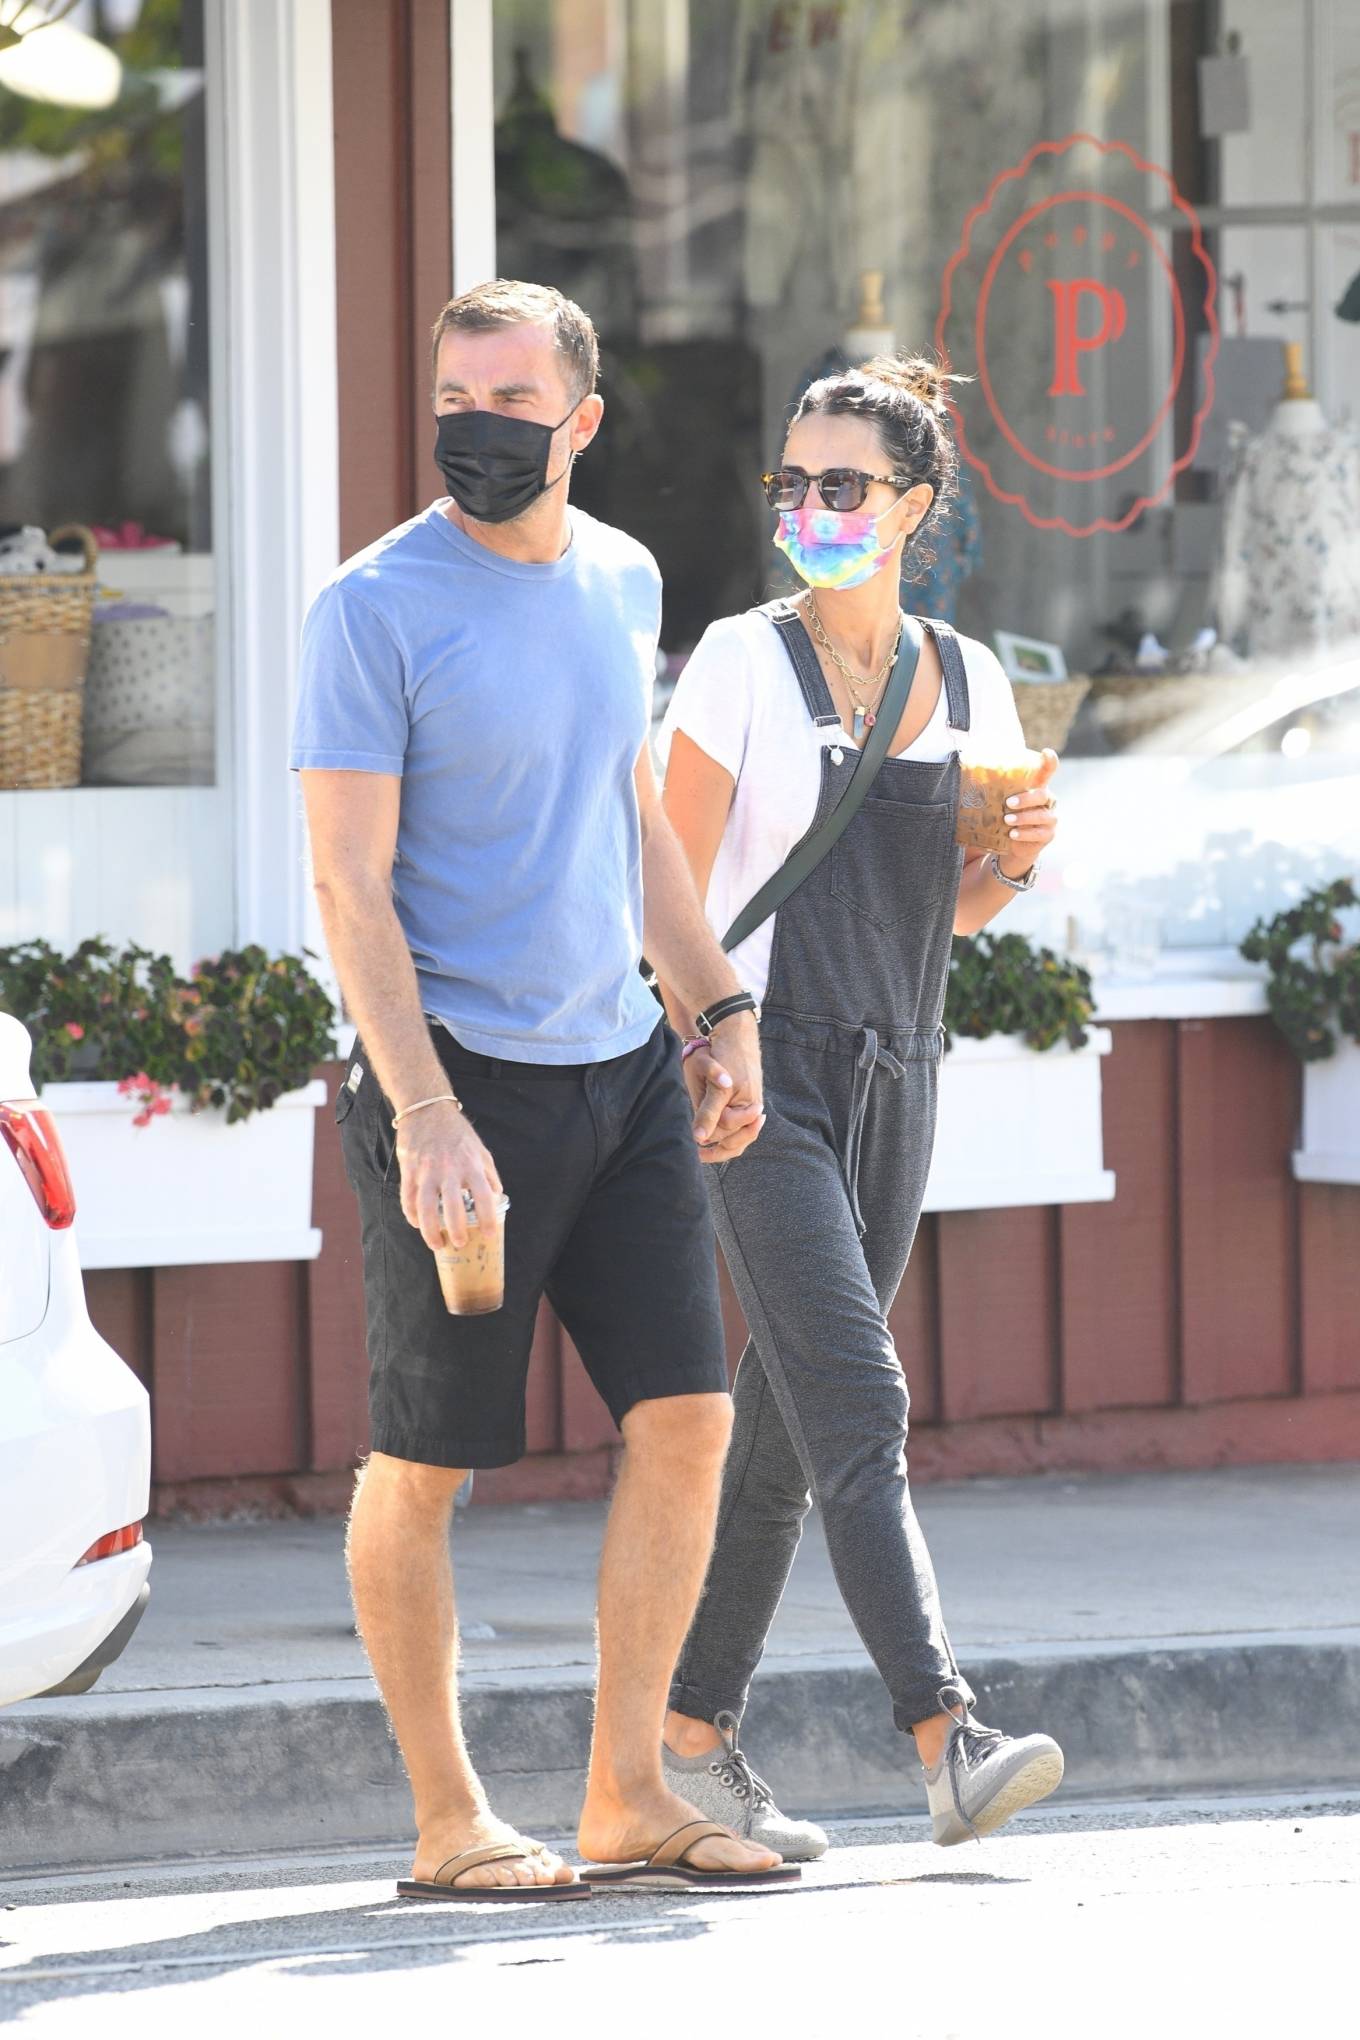 Jordana Brewster - spotted out and about in Brentwood